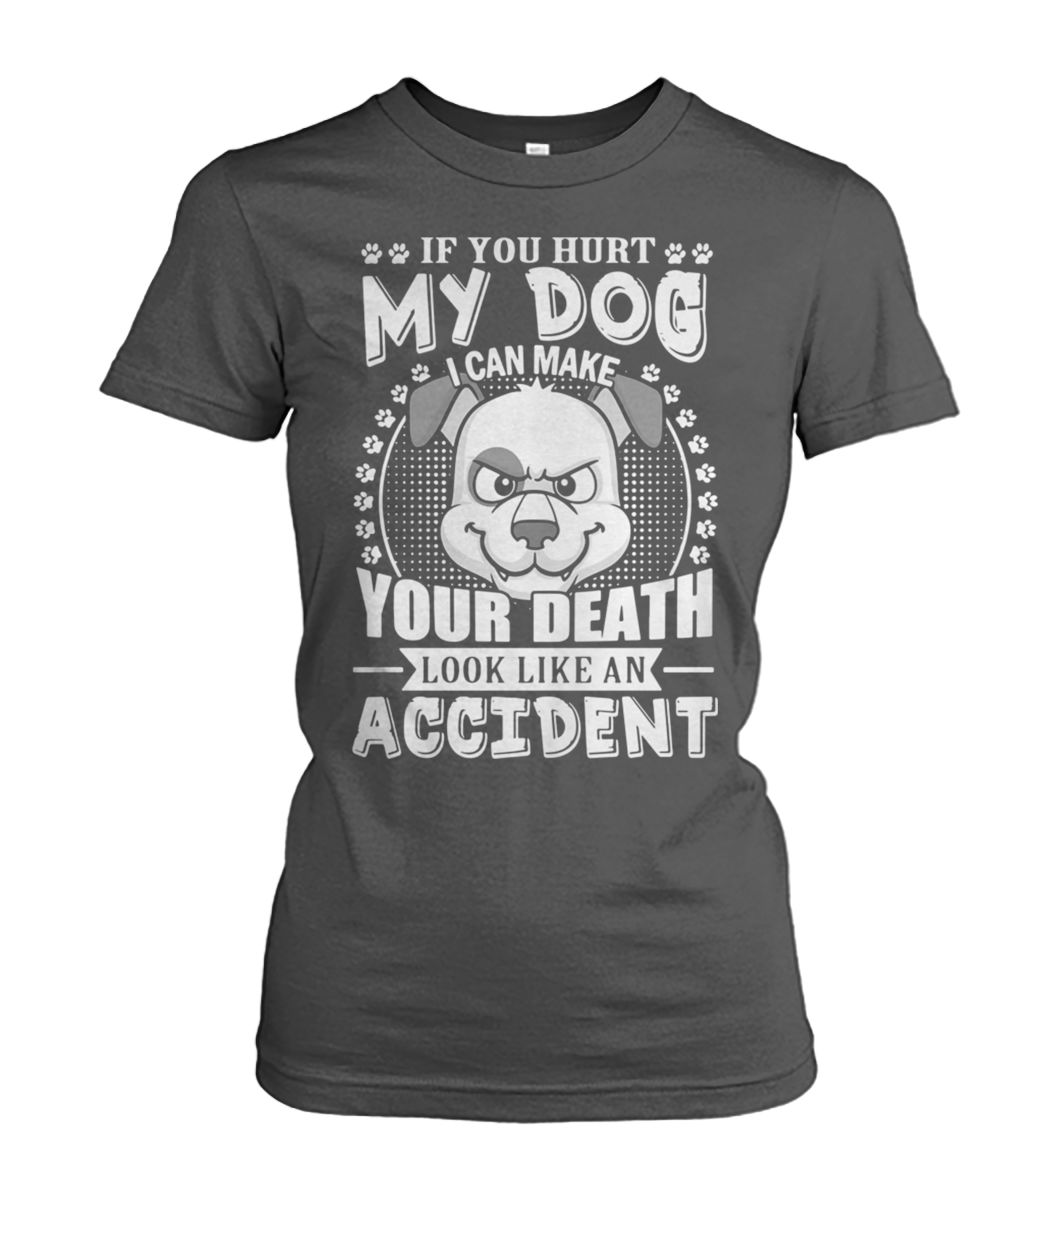 If you hurt my dog I can make your death look like an accident women's crew tee